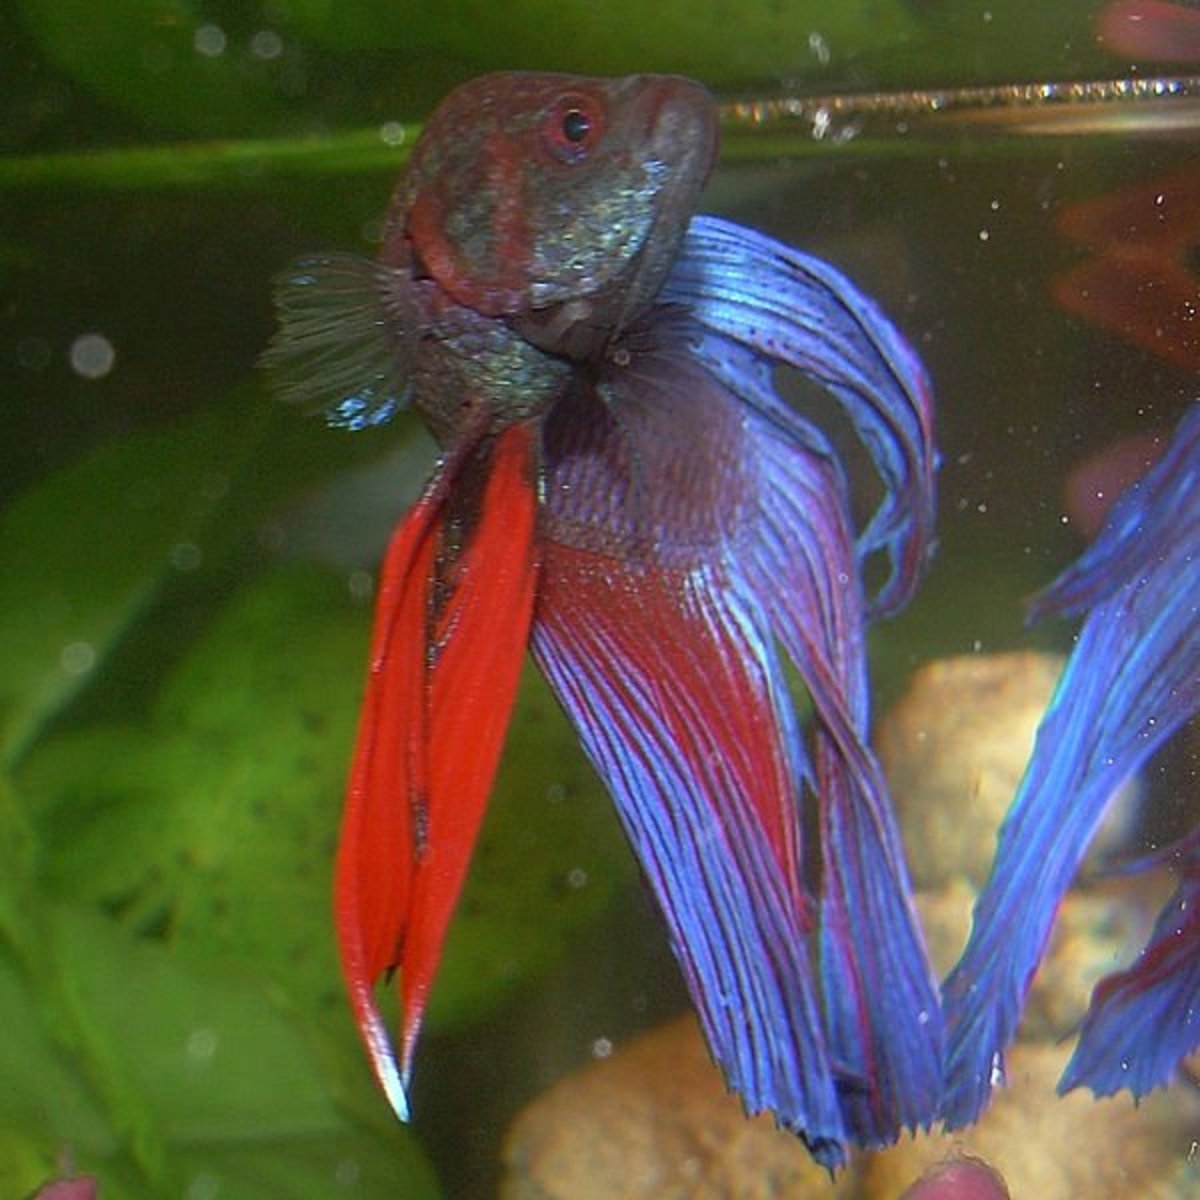 Do Betta Fish Need a Heater and Filter in Their Tank